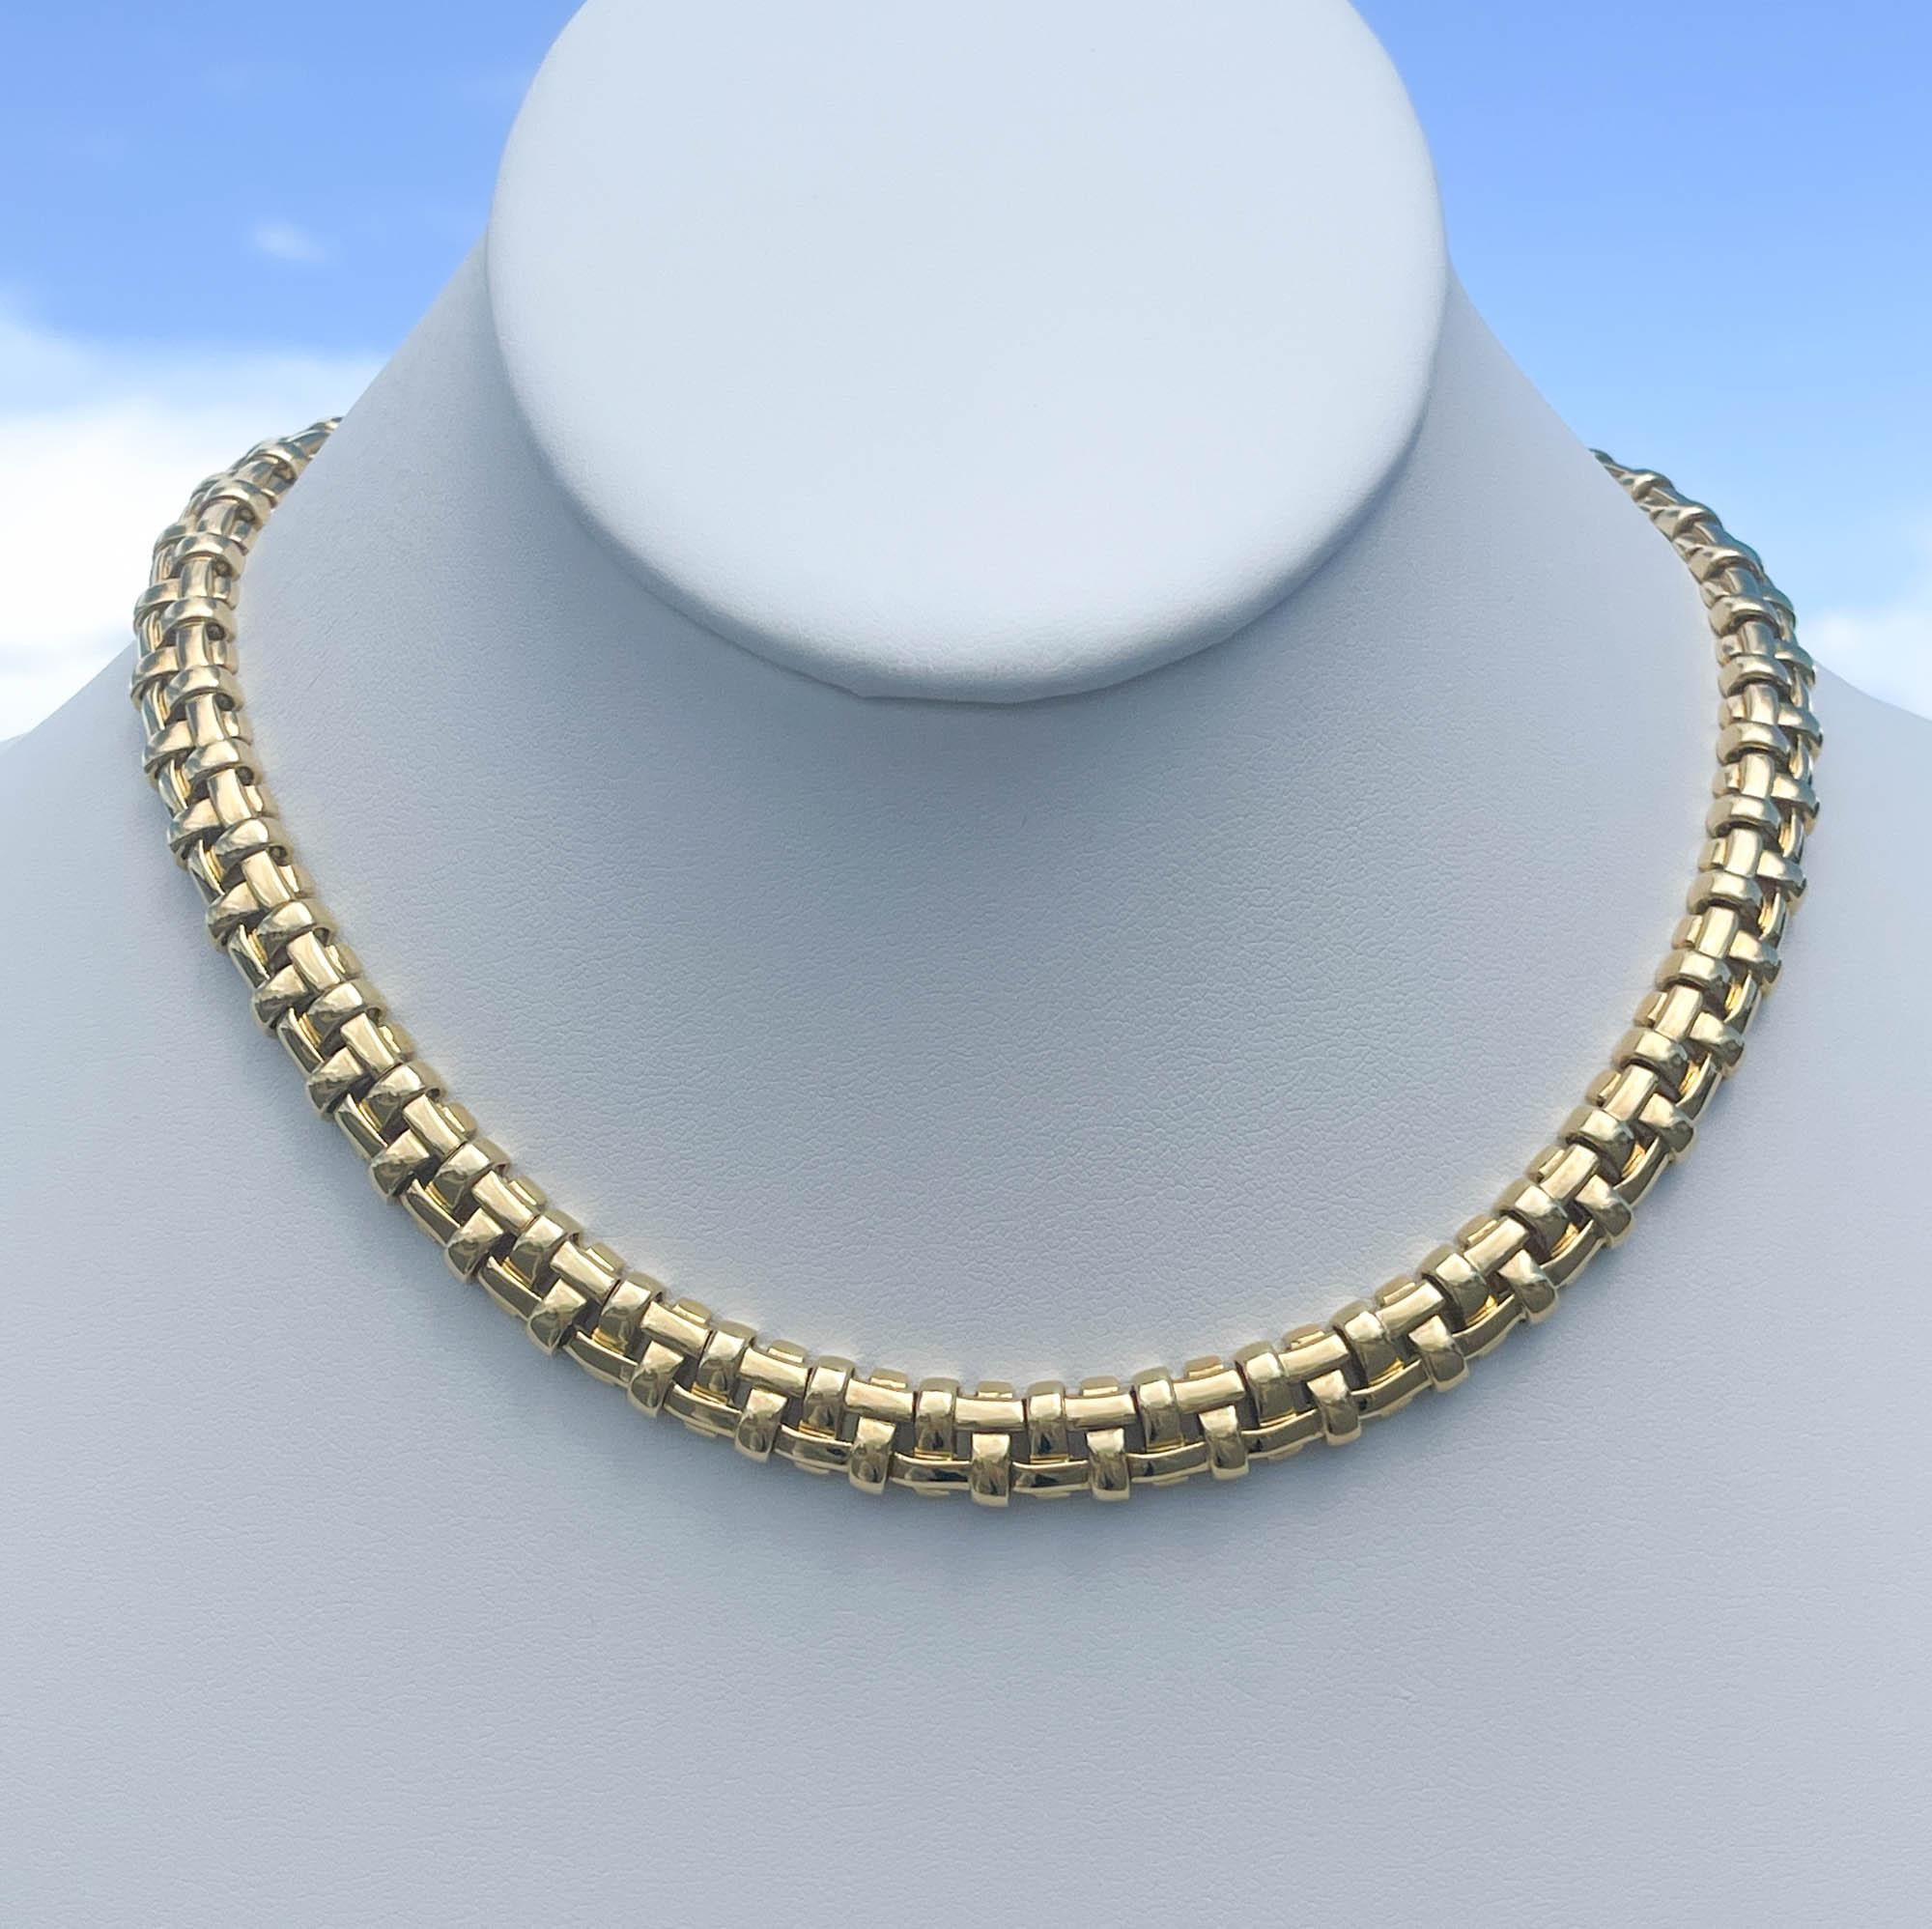 Tiffany & Co Vanerie 18k Yellow Gold Choker Necklace 
The necklace is 16 inches long and 9mm wide. 
Total weight of the necklace is 81.5 grams.
Hallmarks: 2002, T&CO, 750, ITALY.

Please view our photos and videos for more details.

Good vintage